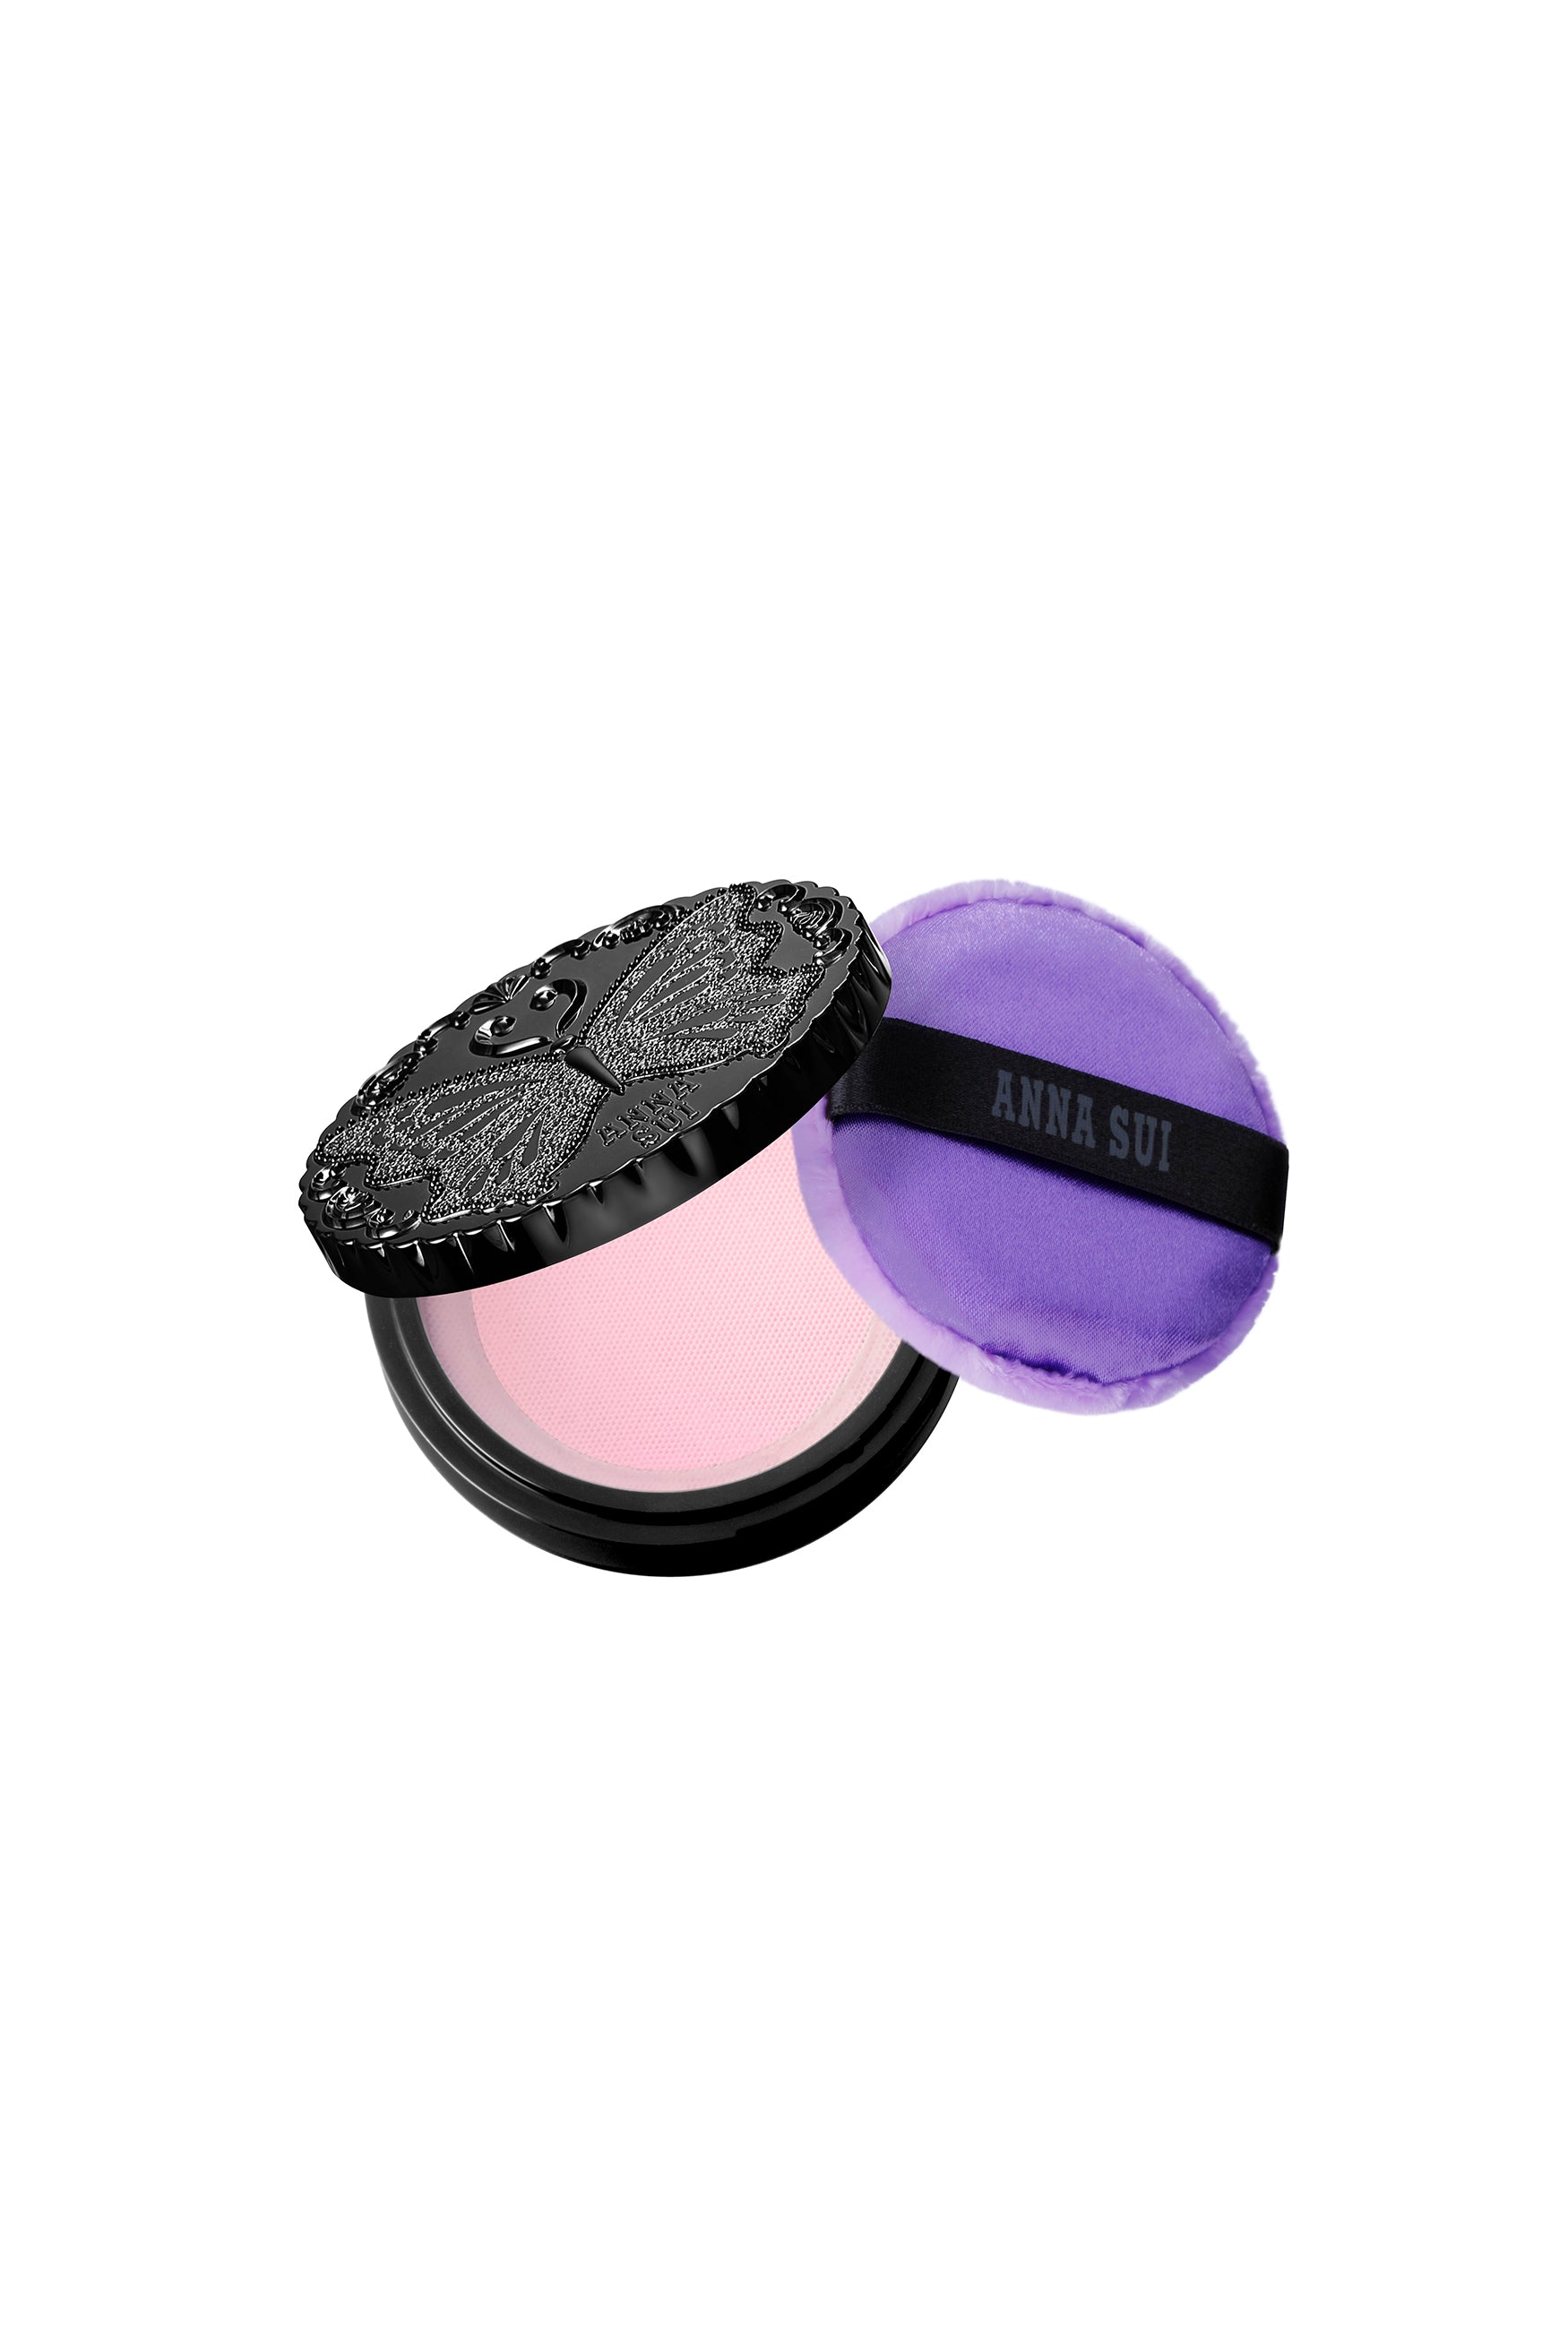 The Classic Loose Powder is a black round box with a butterfly engrave on top, with CASE + 300: powder, and sponge